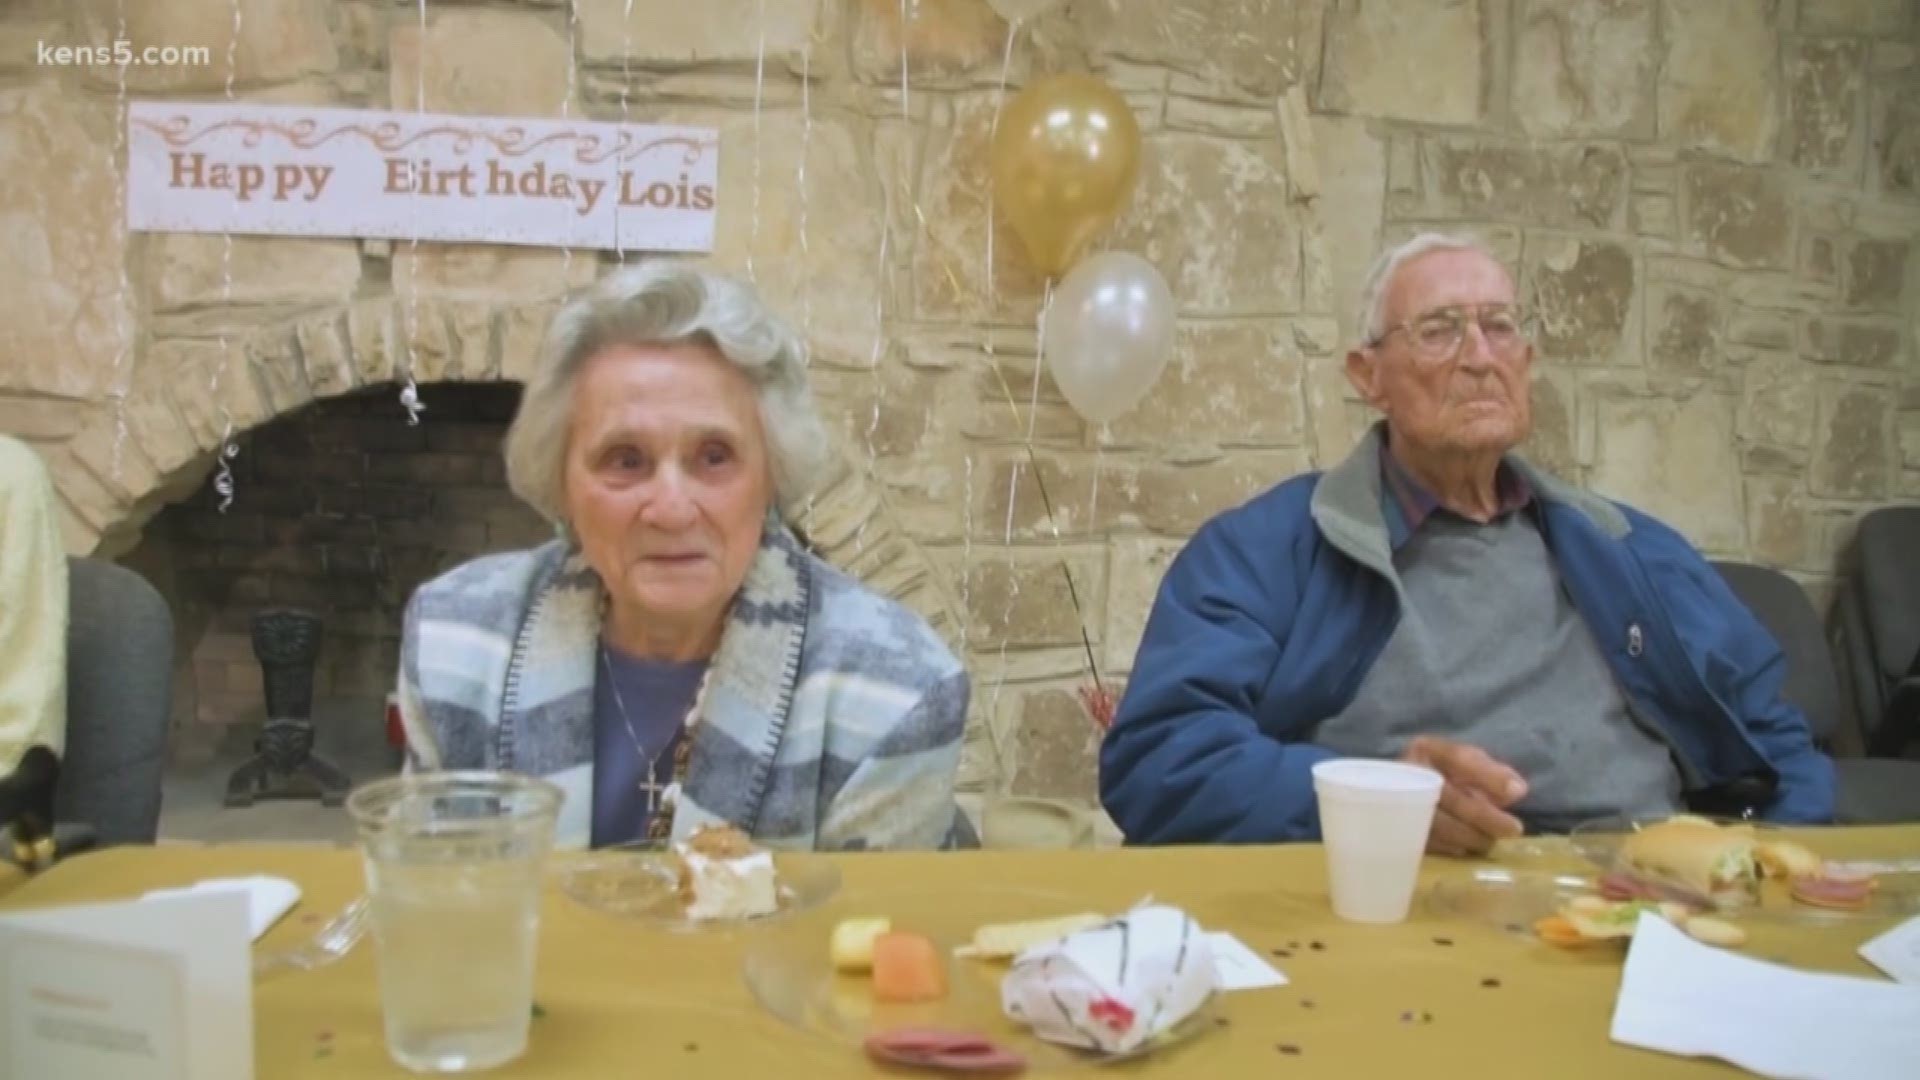 They say you're only as old as you feel. One centenarian is proving that saying to be true.